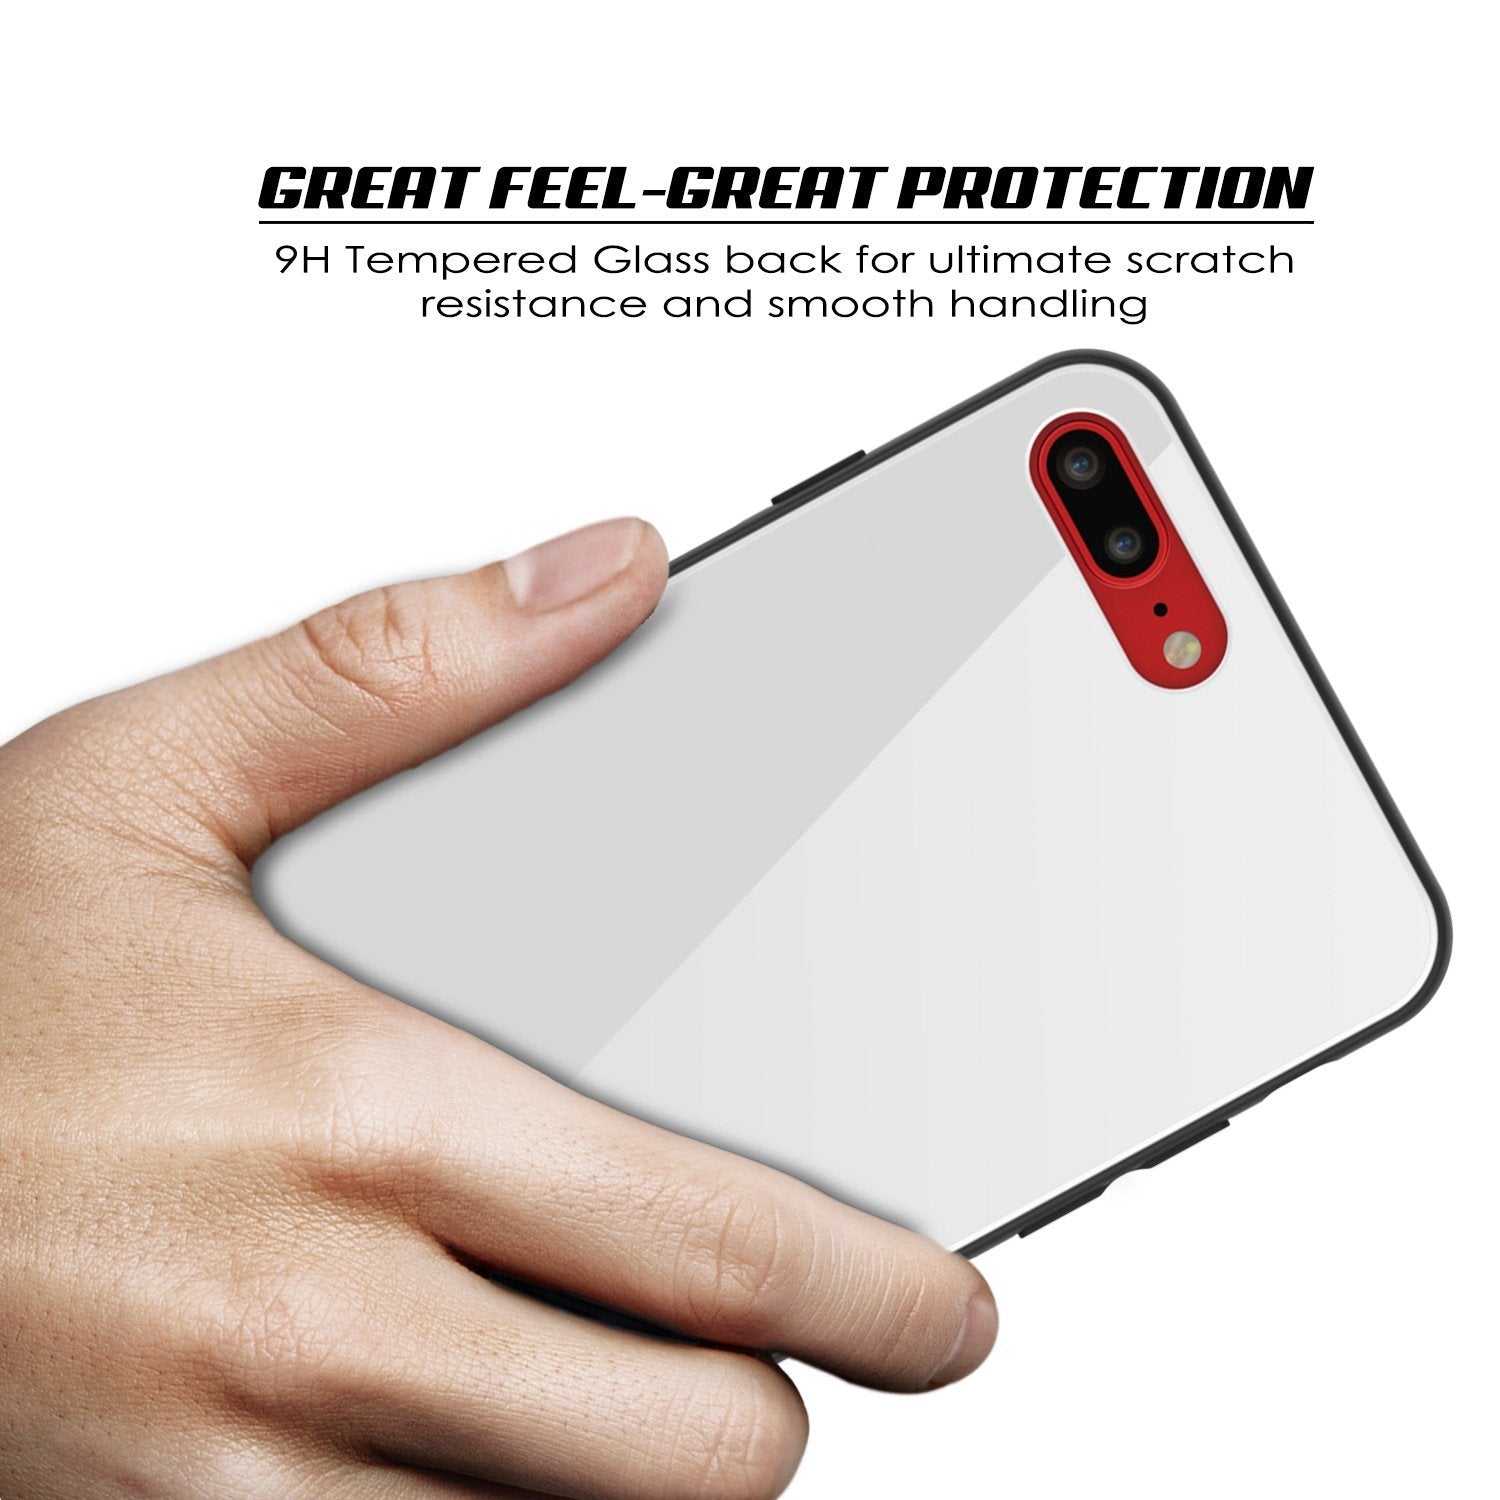 iPhone 8 PLUS Case, Punkcase GlassShield Ultra Thin Protective 9H Full Body Tempered Glass Cover W/ Drop Protection & Non Slip Grip for Apple iPhone 7 PLUS / Apple iPhone 8 PLUS (White)